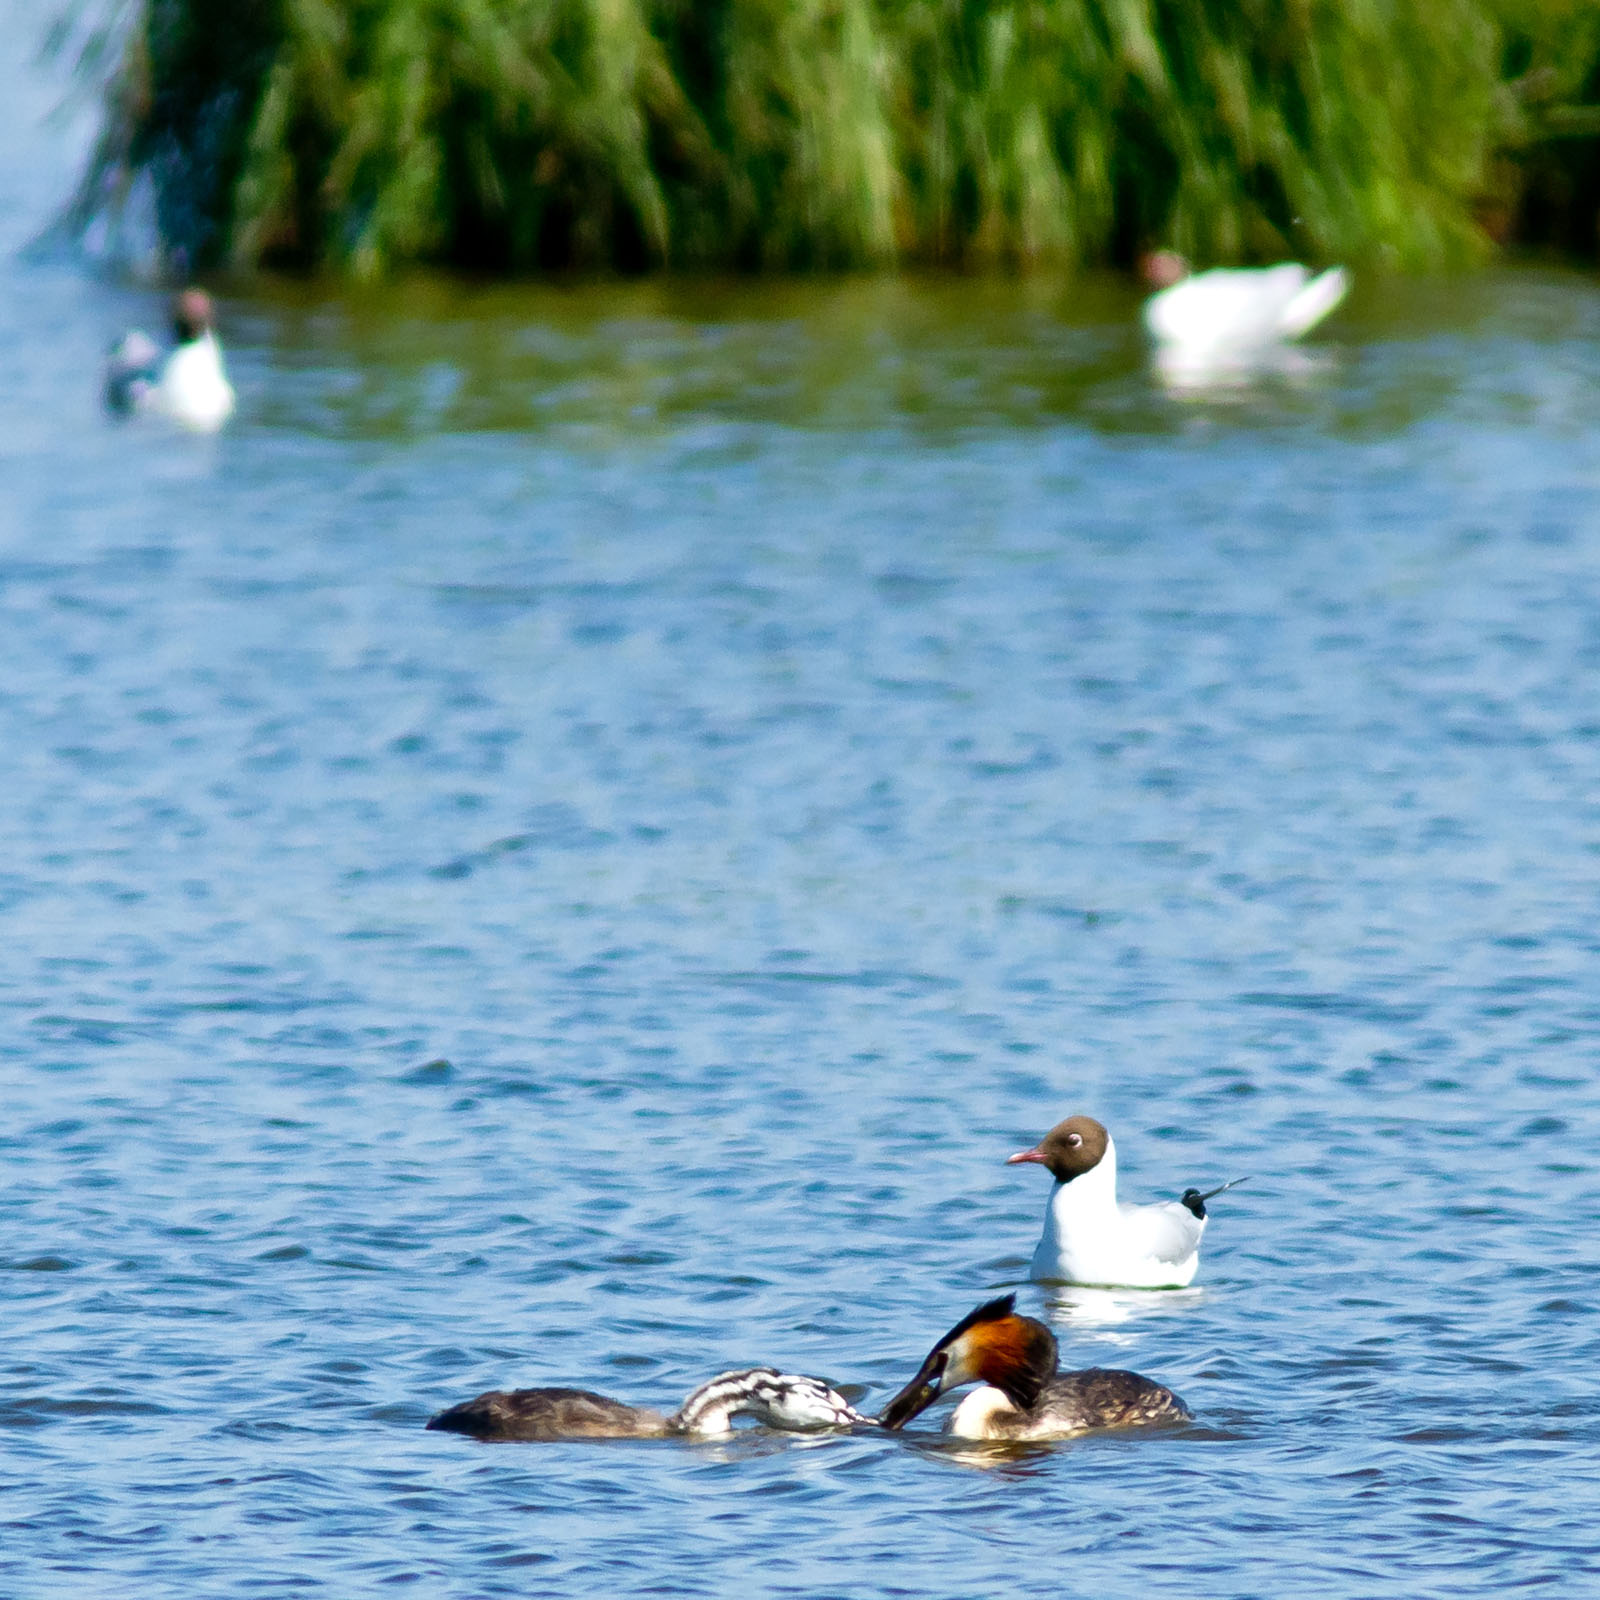 /Guewen/galeries/public/Nature/France/Grebes_Brenne/Grebes_005.jpg